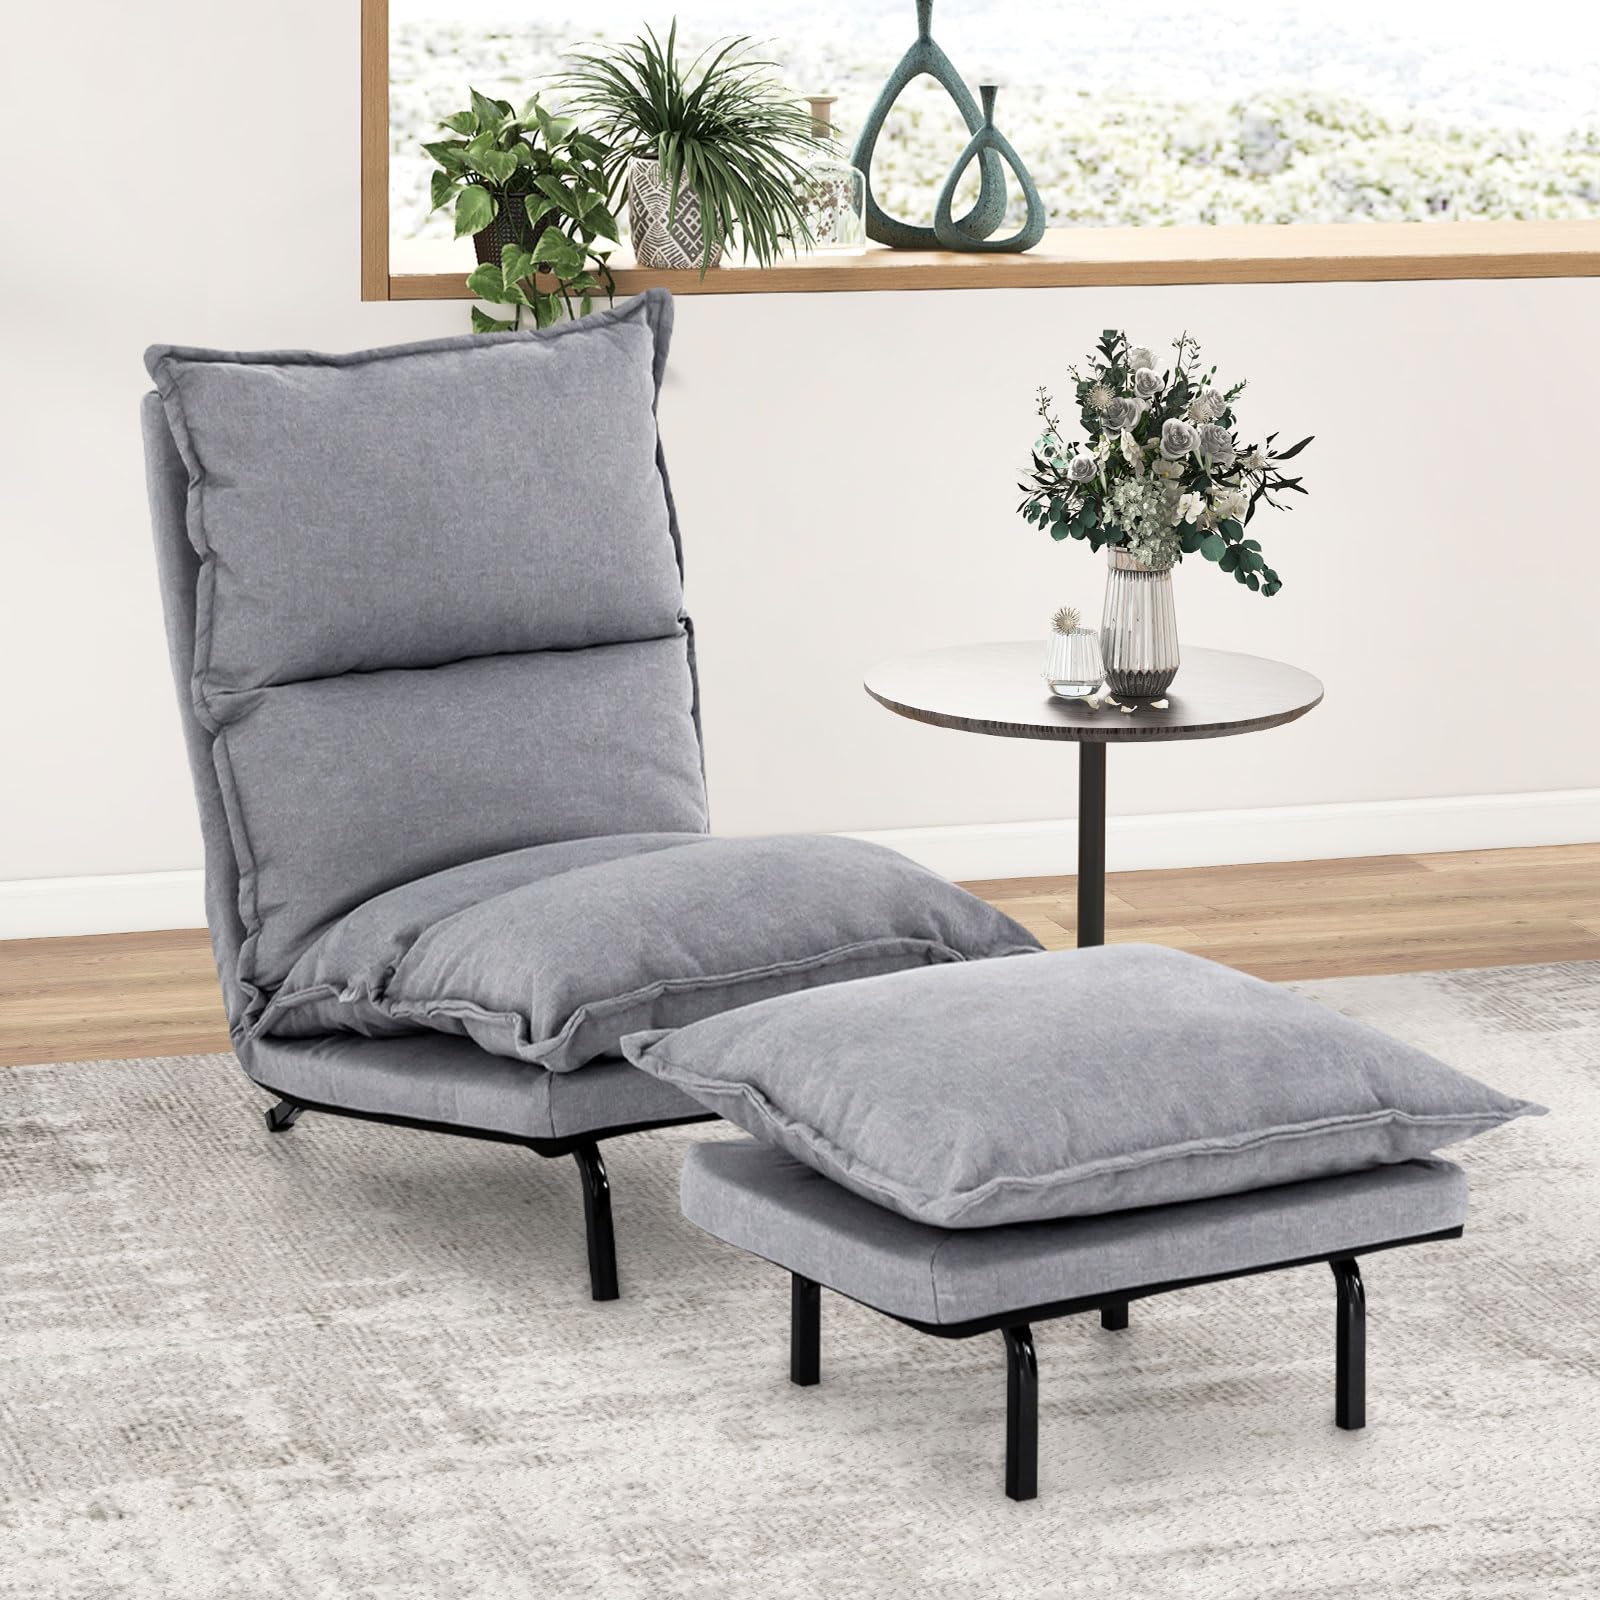 Giantex Accent Chair with Ottoman Gray, Upholstered Lazy Sofa Chair with Ottoman